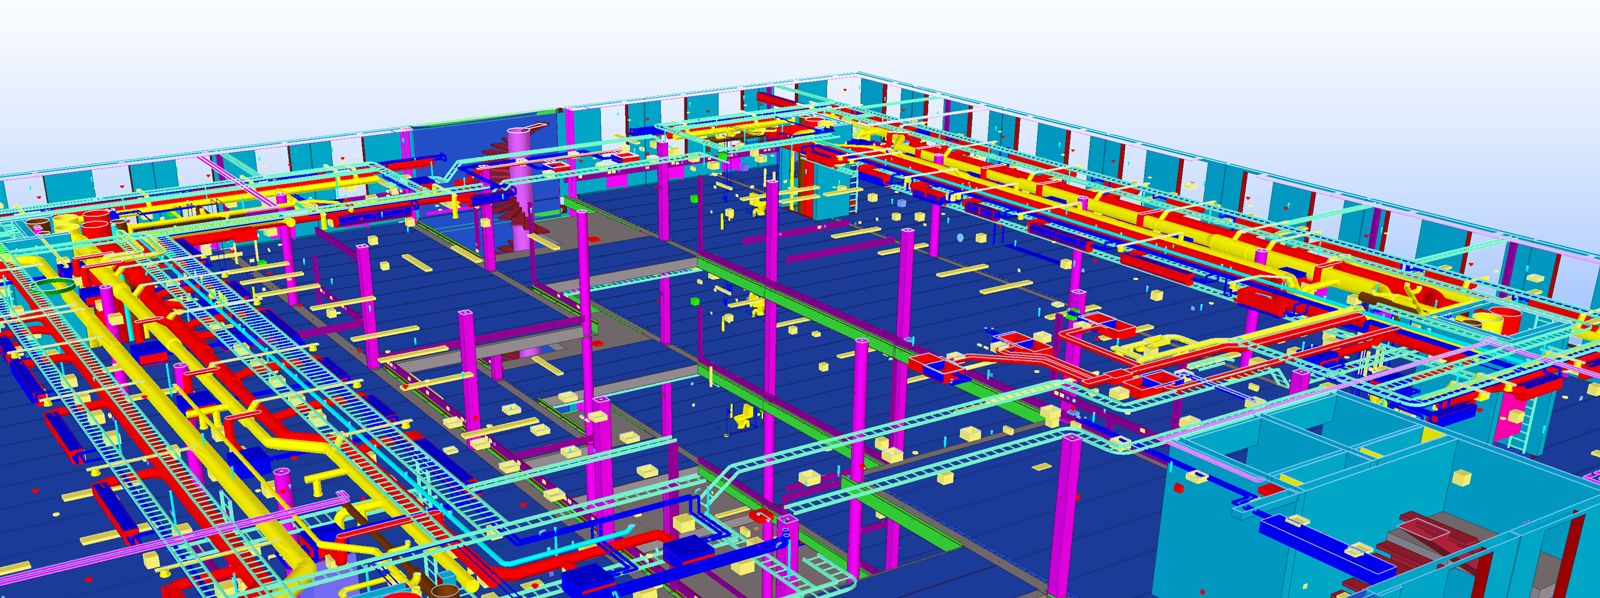 Ideate Technologies: Convergence of Building Information Modeling